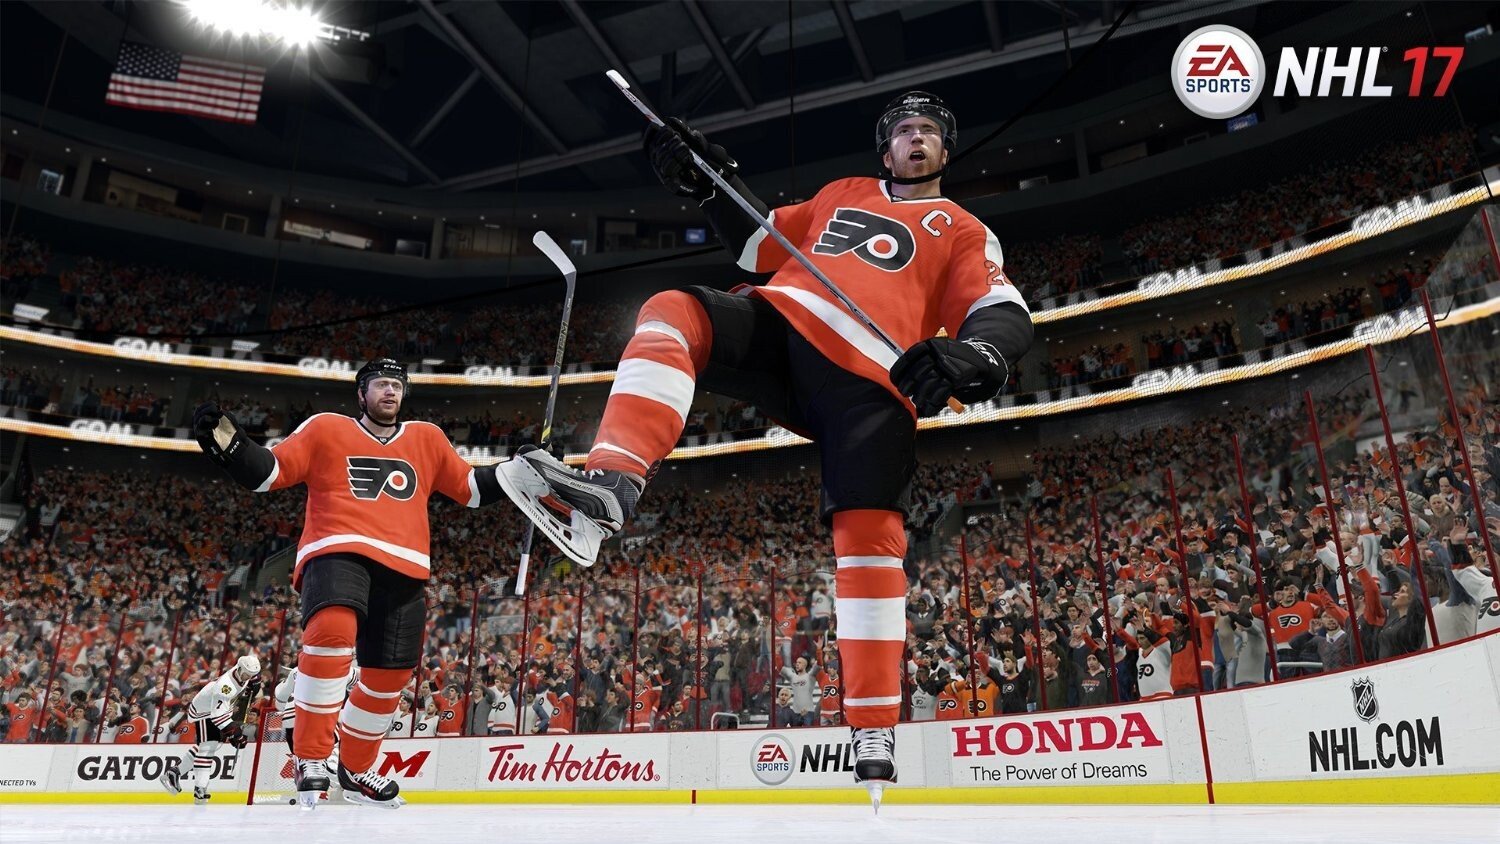 Nhl 17 Xbox One Review